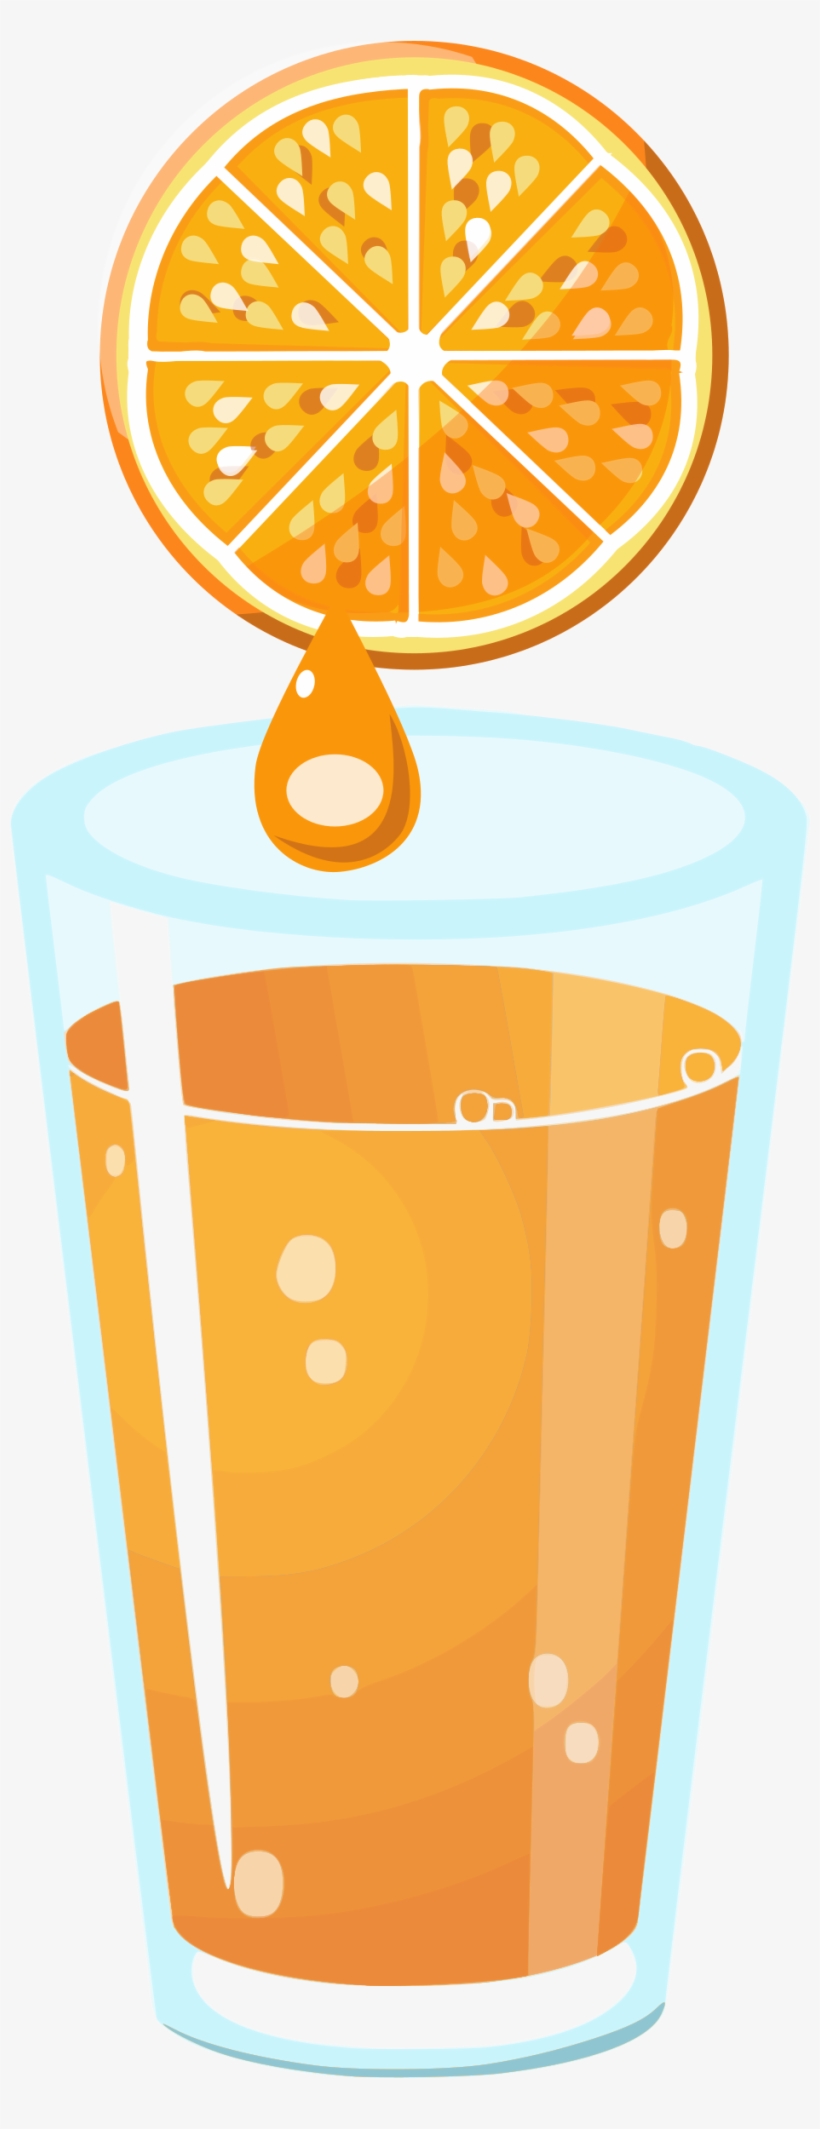 Download And Use - Squeezing Orange Juice Clipart, transparent png #3662062